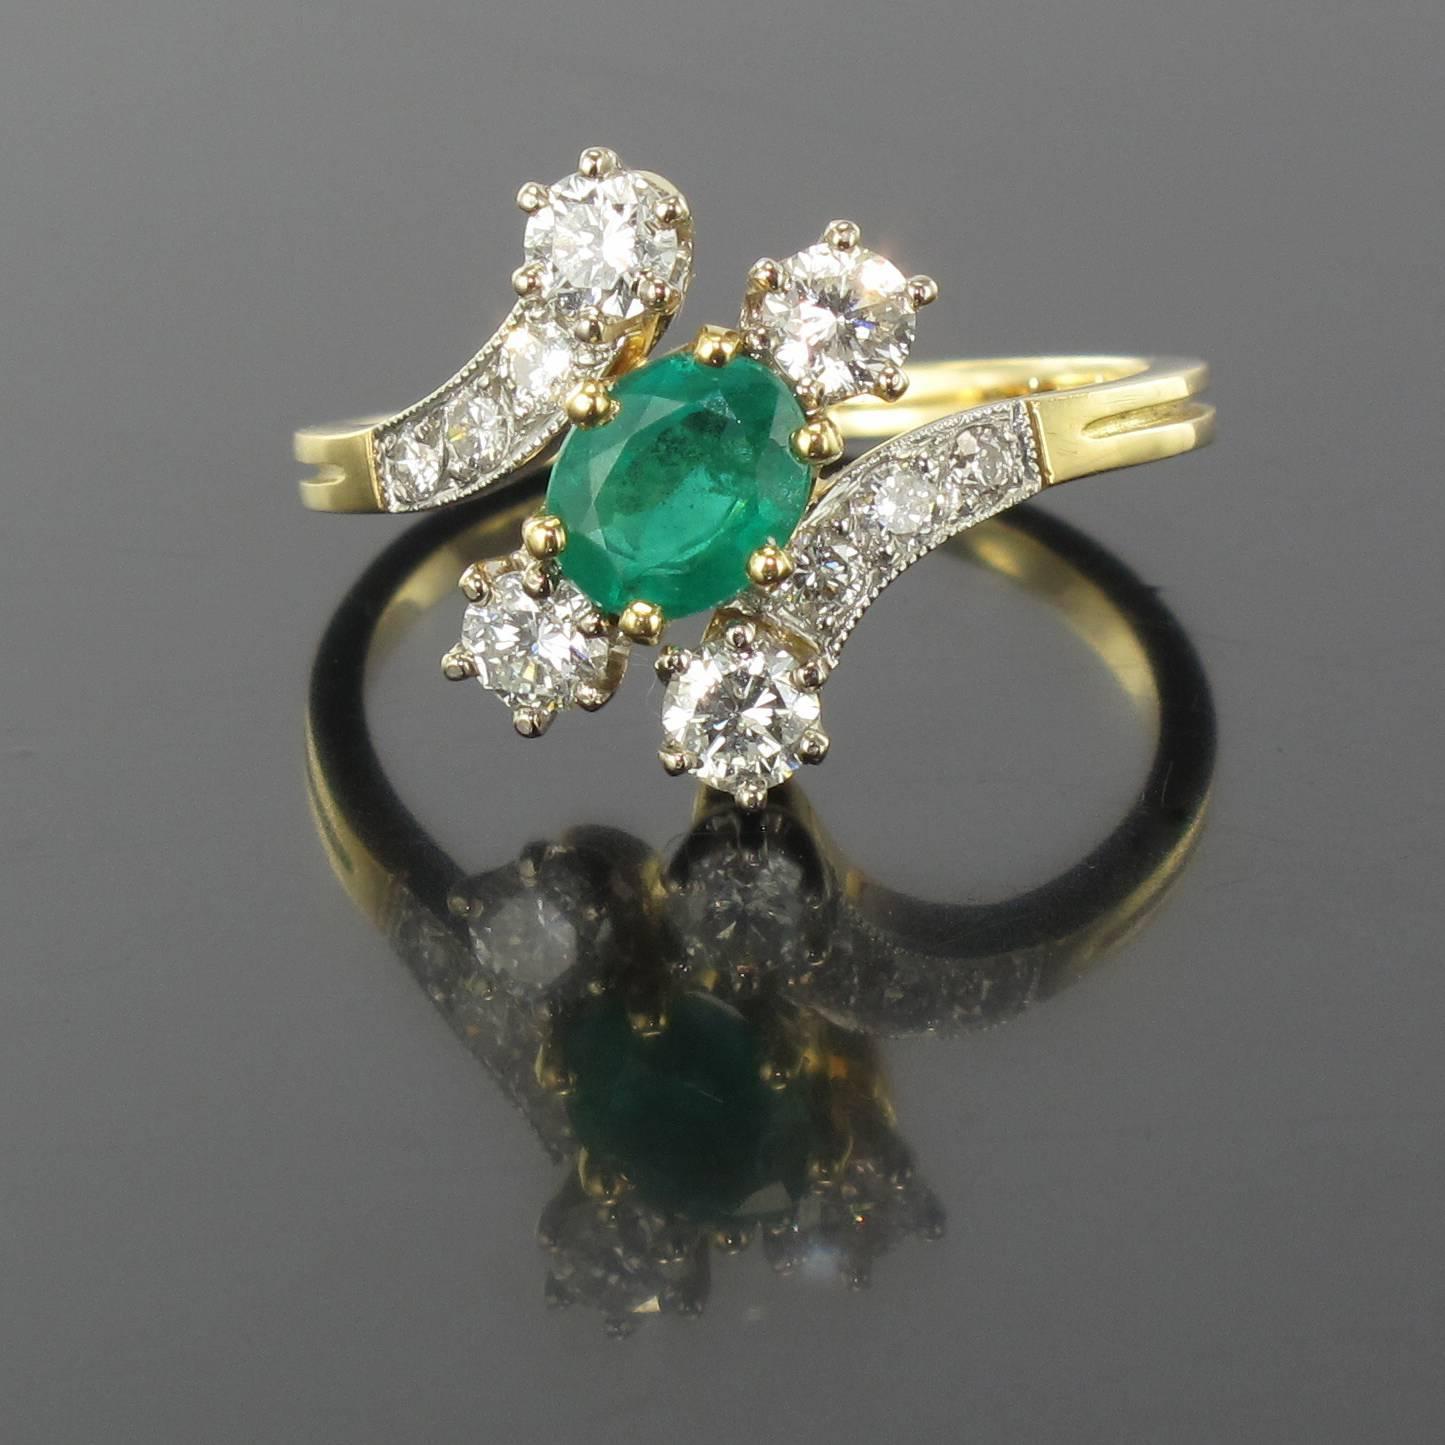 Ring in 18 carat yellow gold, eagle head hallmark and platinium, dog head hallmark.

This ring is diagonally claw set with an oval emerald between two diamonds. At each side another diamond and a curve of three other smaller diamonds forms the